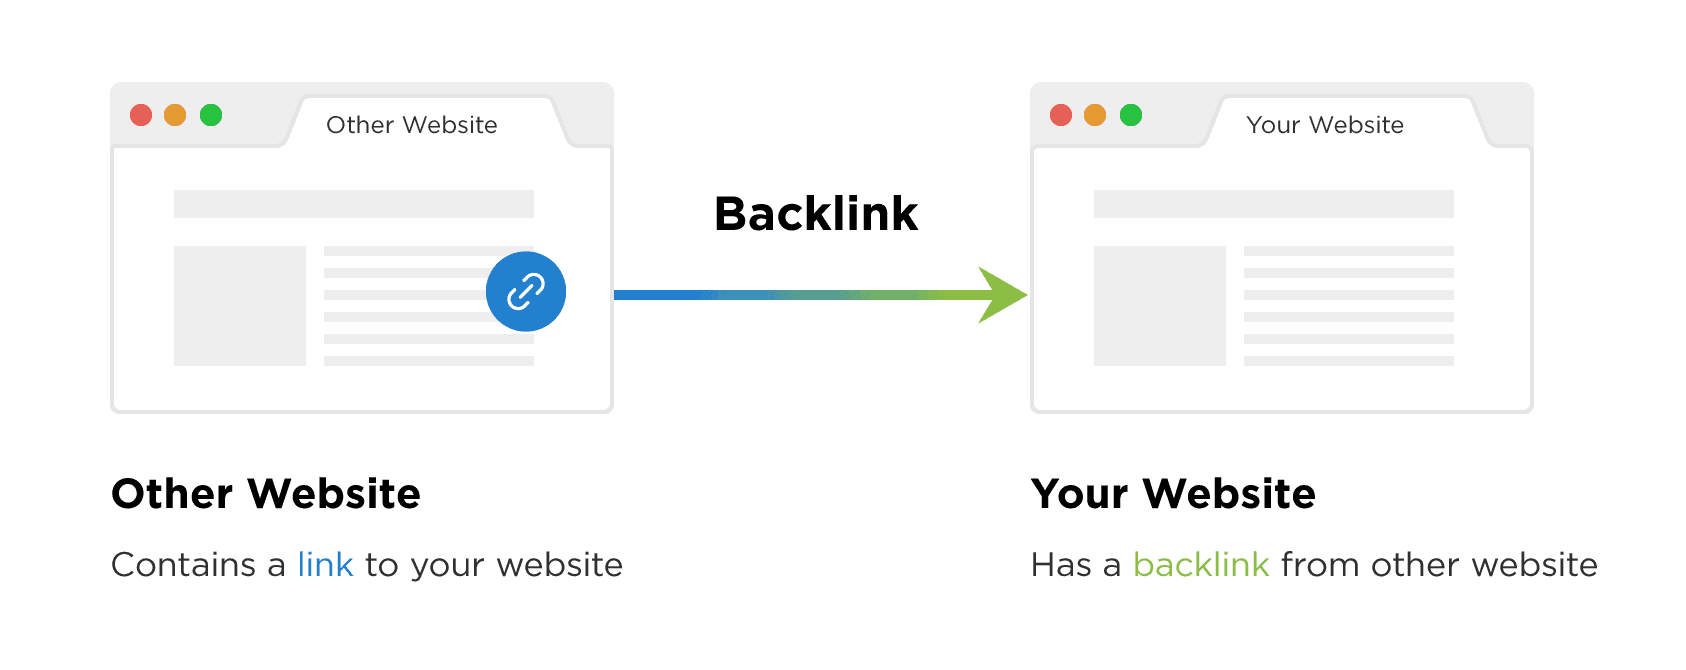 What are backlinks?